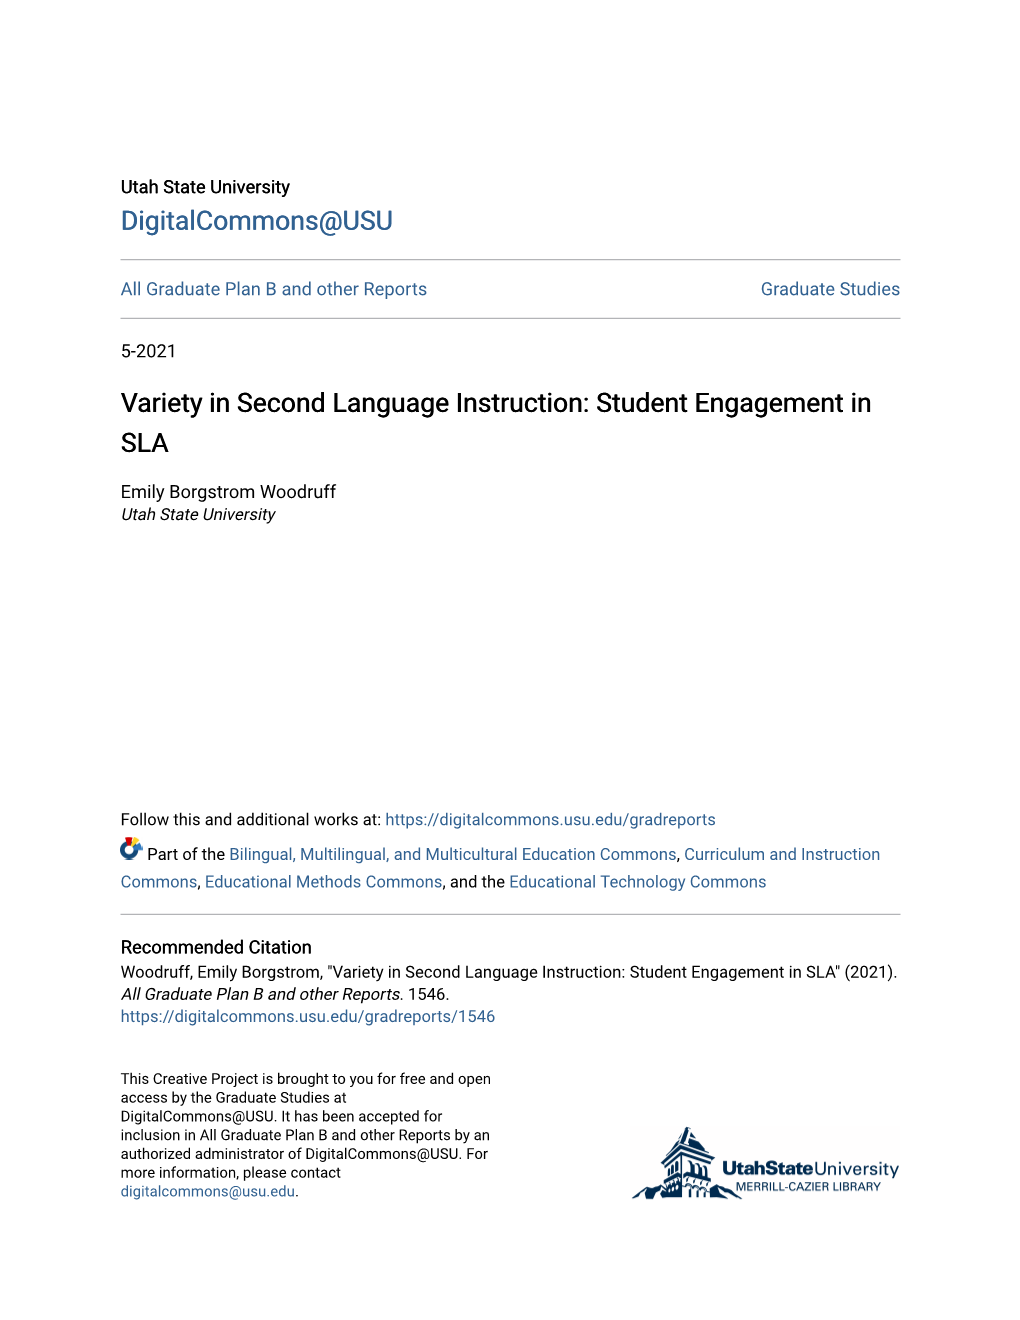 Variety in Second Language Instruction: Student Engagement in SLA